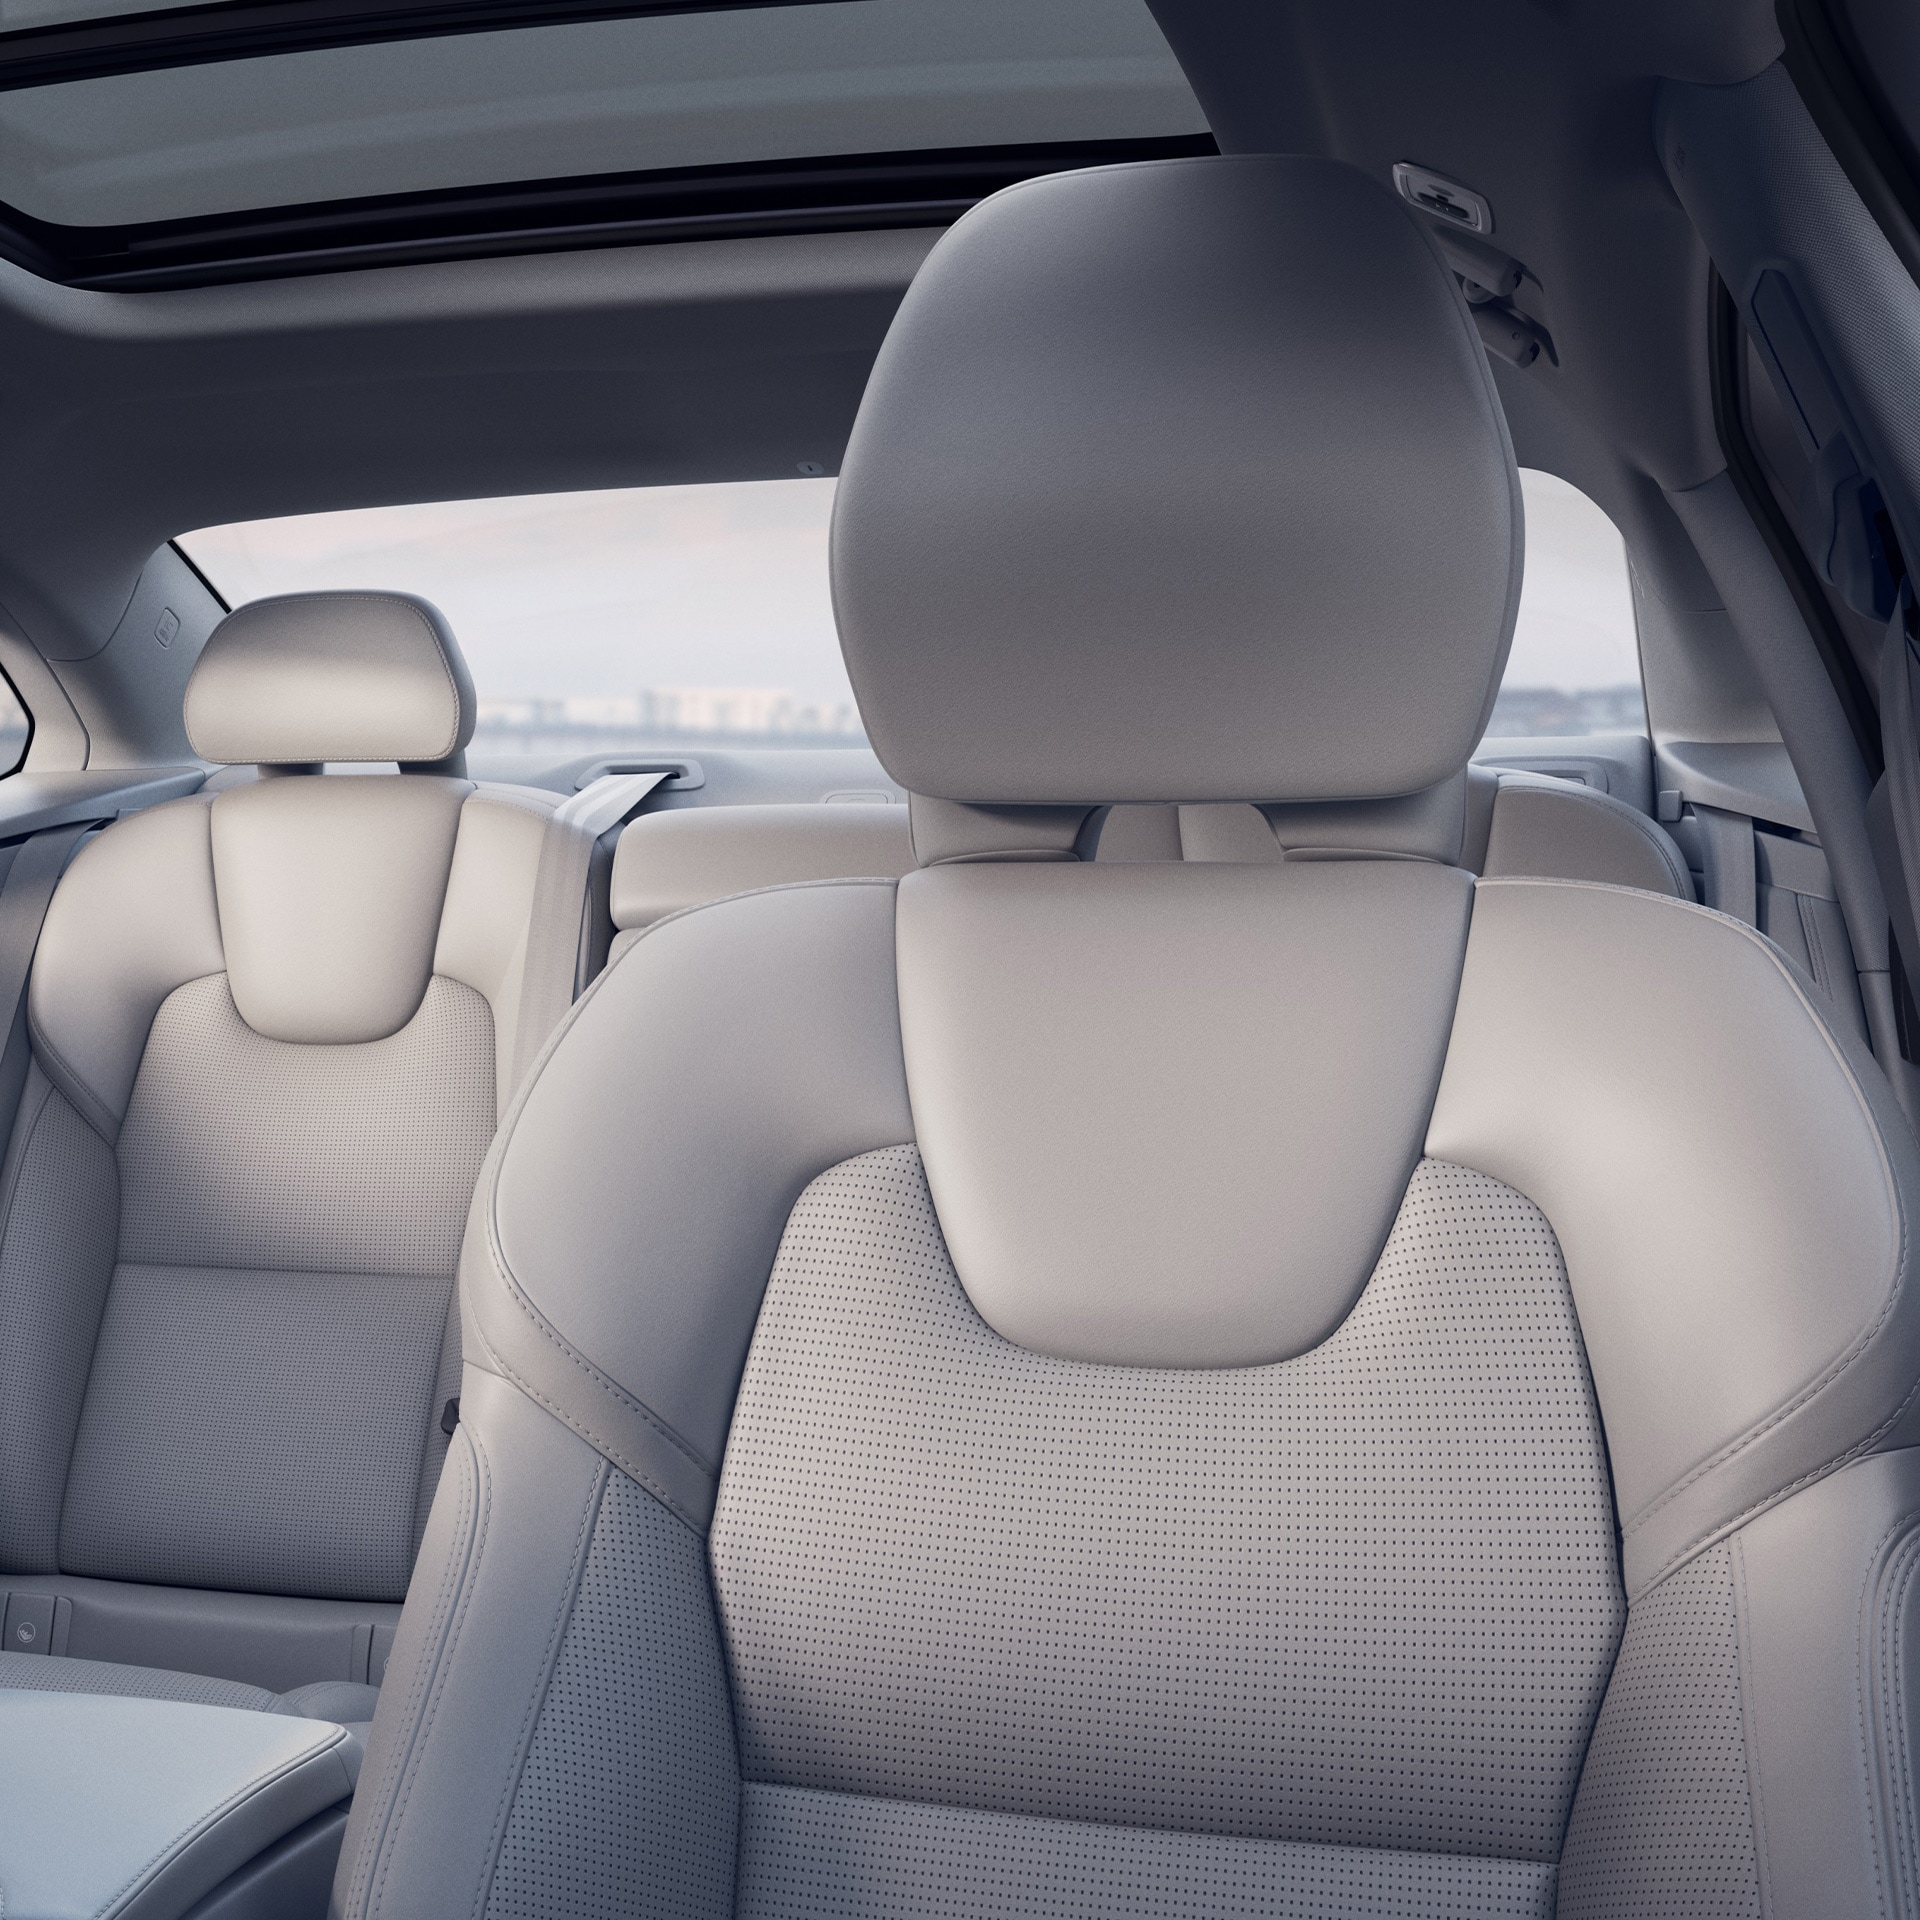 Front and rear seats in Volvo S90.